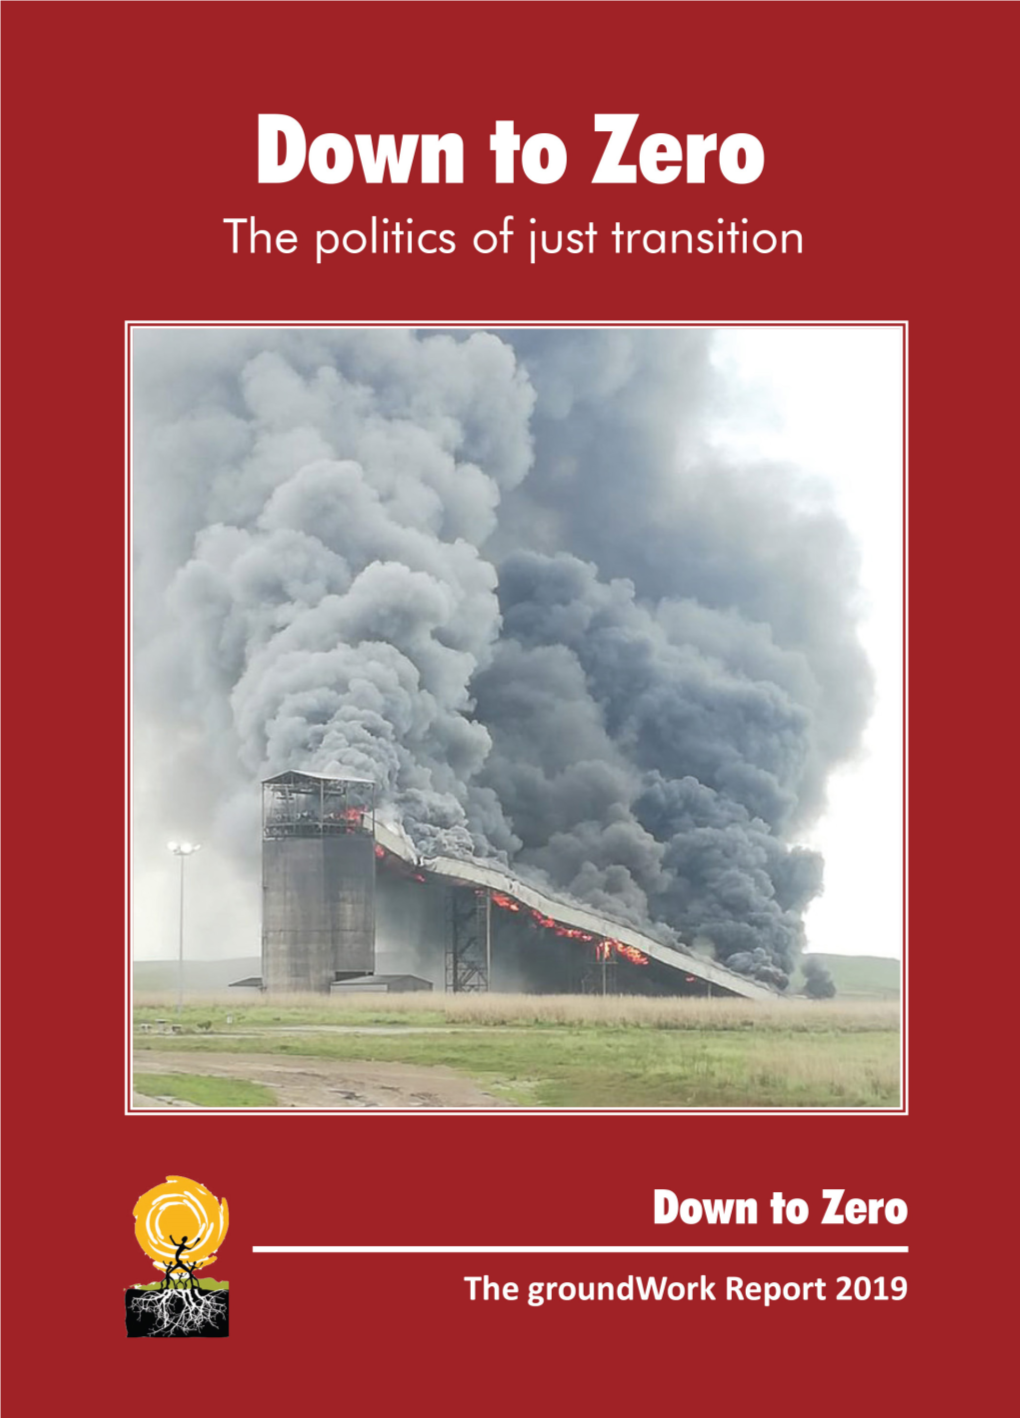 Down to Zero: the Politics of Just Transition